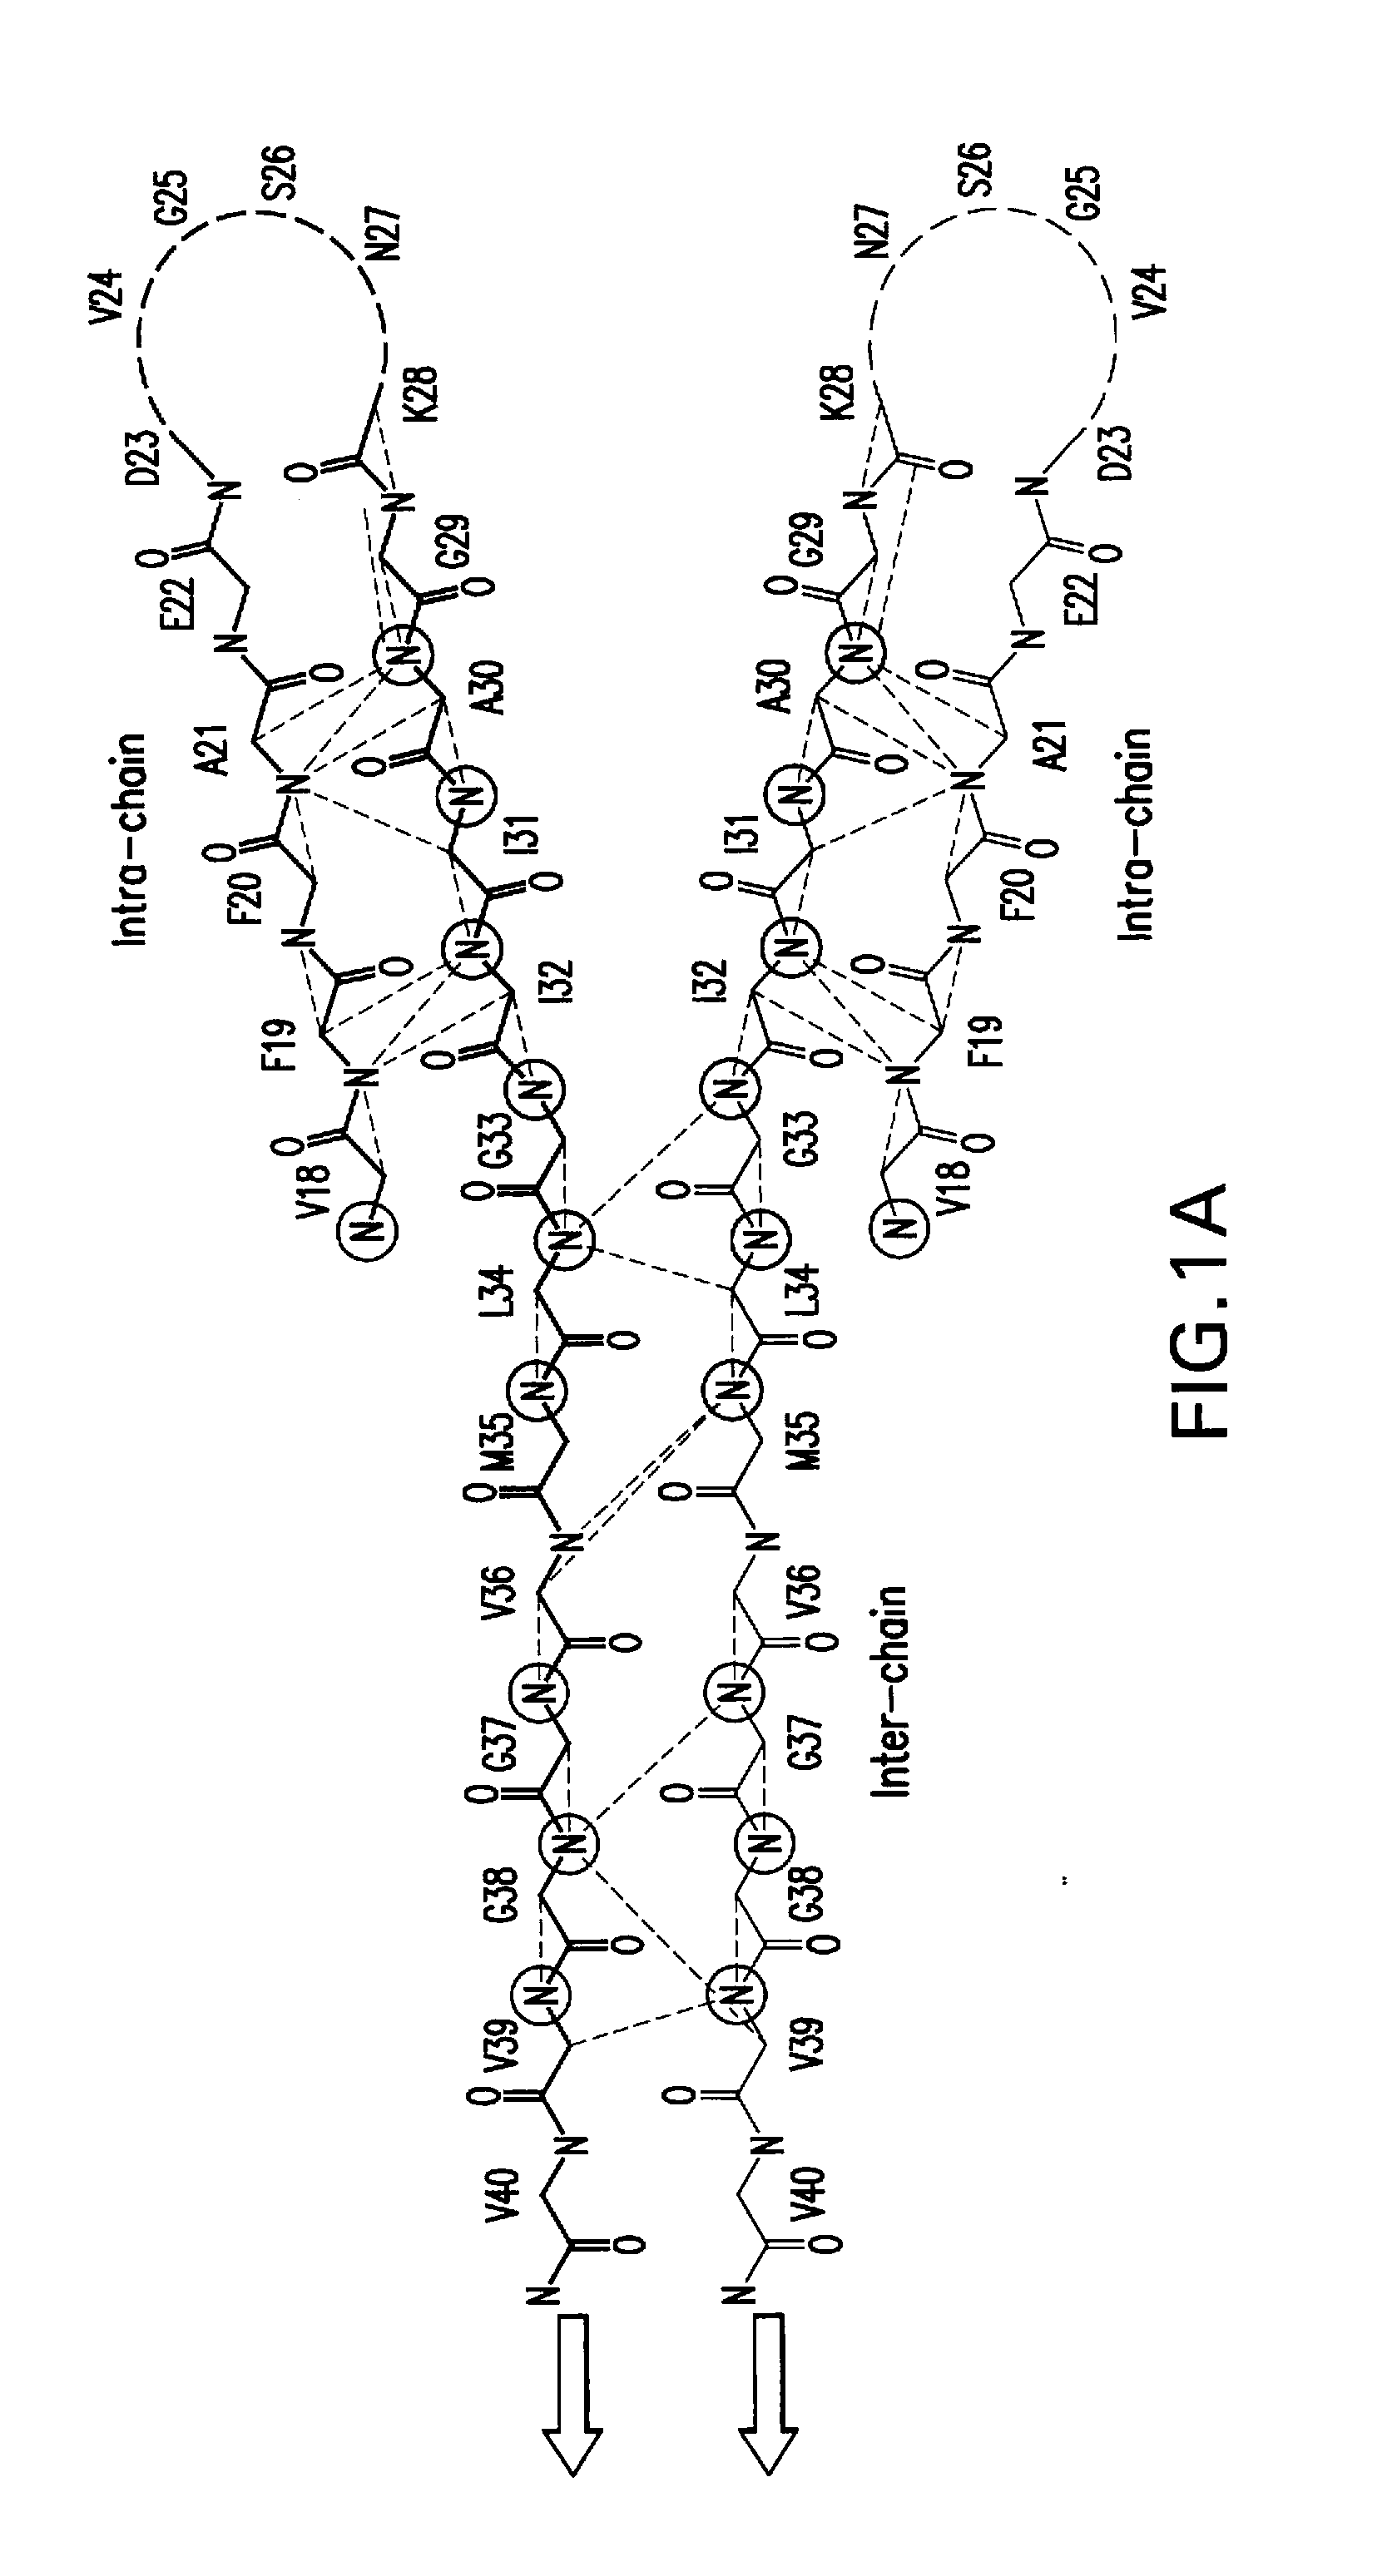 Amyloid ß peptide analogues, oligomers thereof, processes for preparing and composi-tions comprising said analogues or oligomers, and their uses